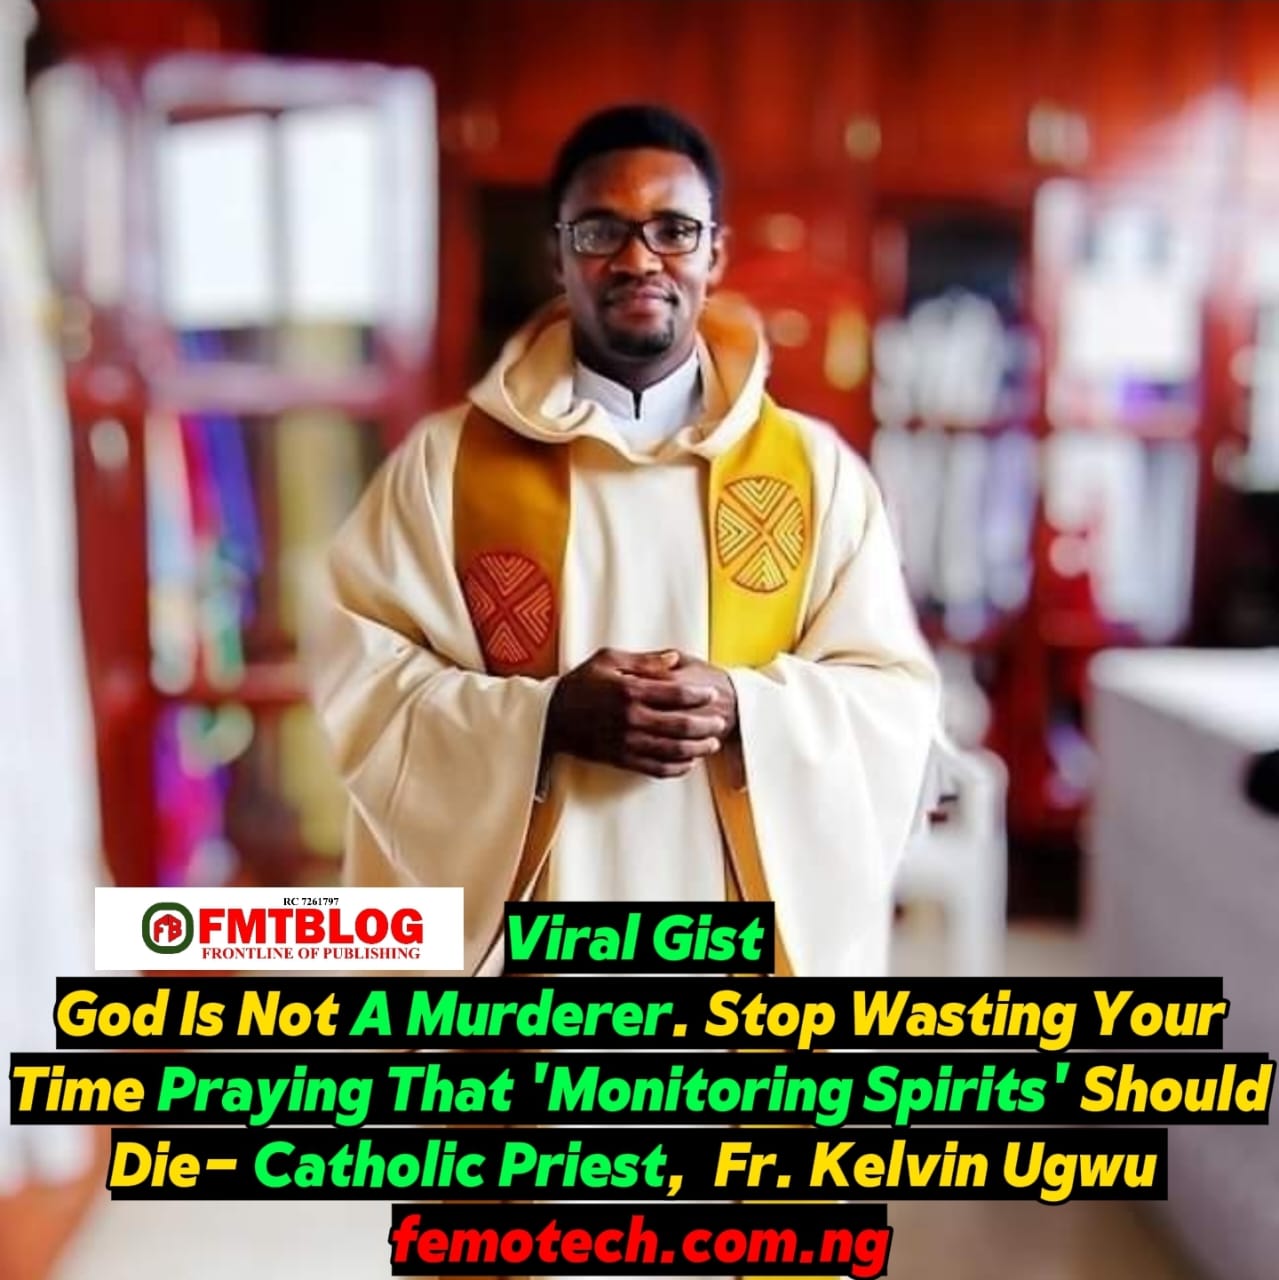 God Is Not A Murderer. Christians Stop Wasting Your Time Praying That ‘Monitoring Spirit’ Should Die- Catholic Priest, Fr. Kelvin Ugwu